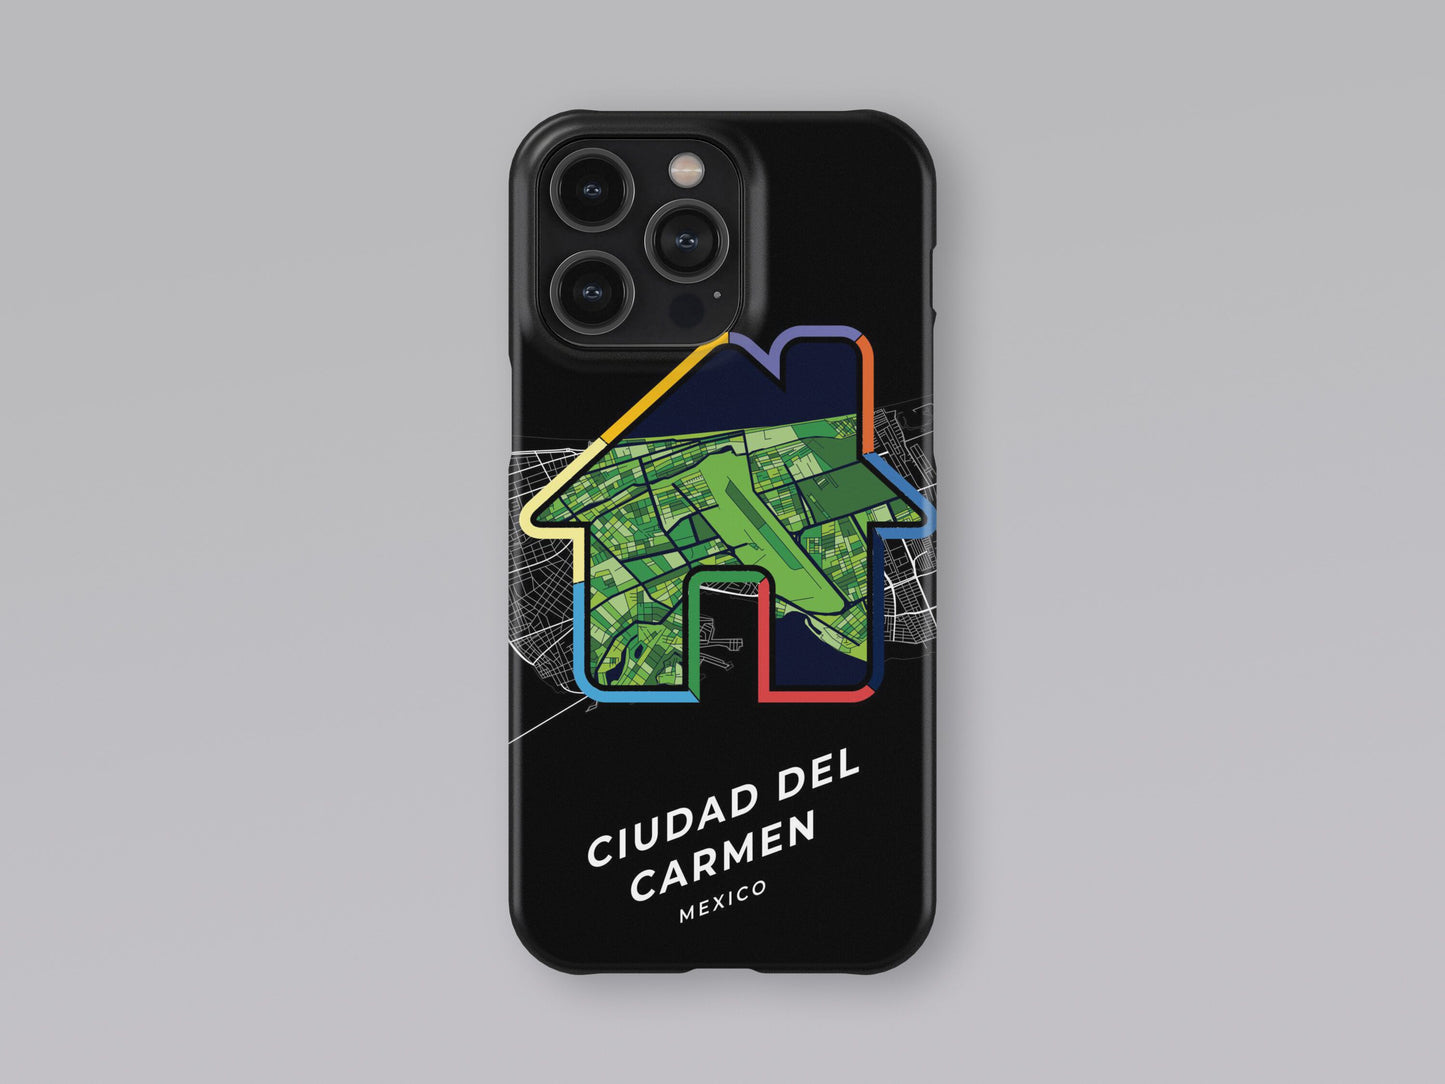 Ciudad Del Carmen Mexico slim phone case with colorful icon. Birthday, wedding or housewarming gift. Couple match cases. 3